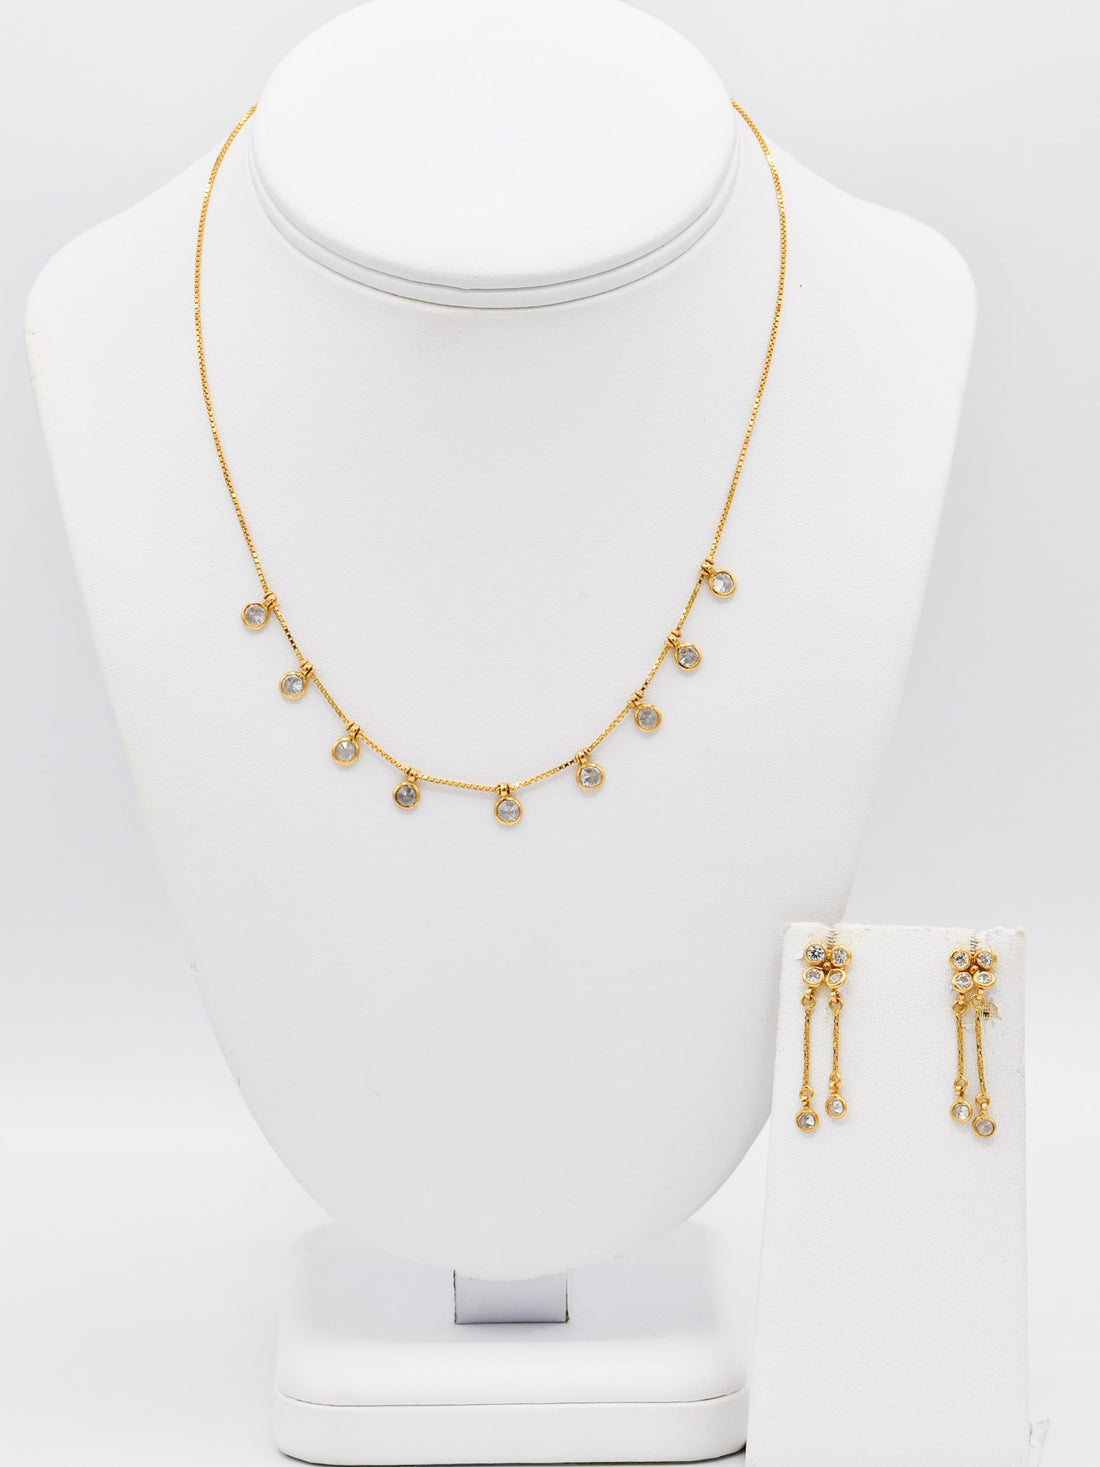 22ct Gold CZ Necklace Set - Roop Darshan